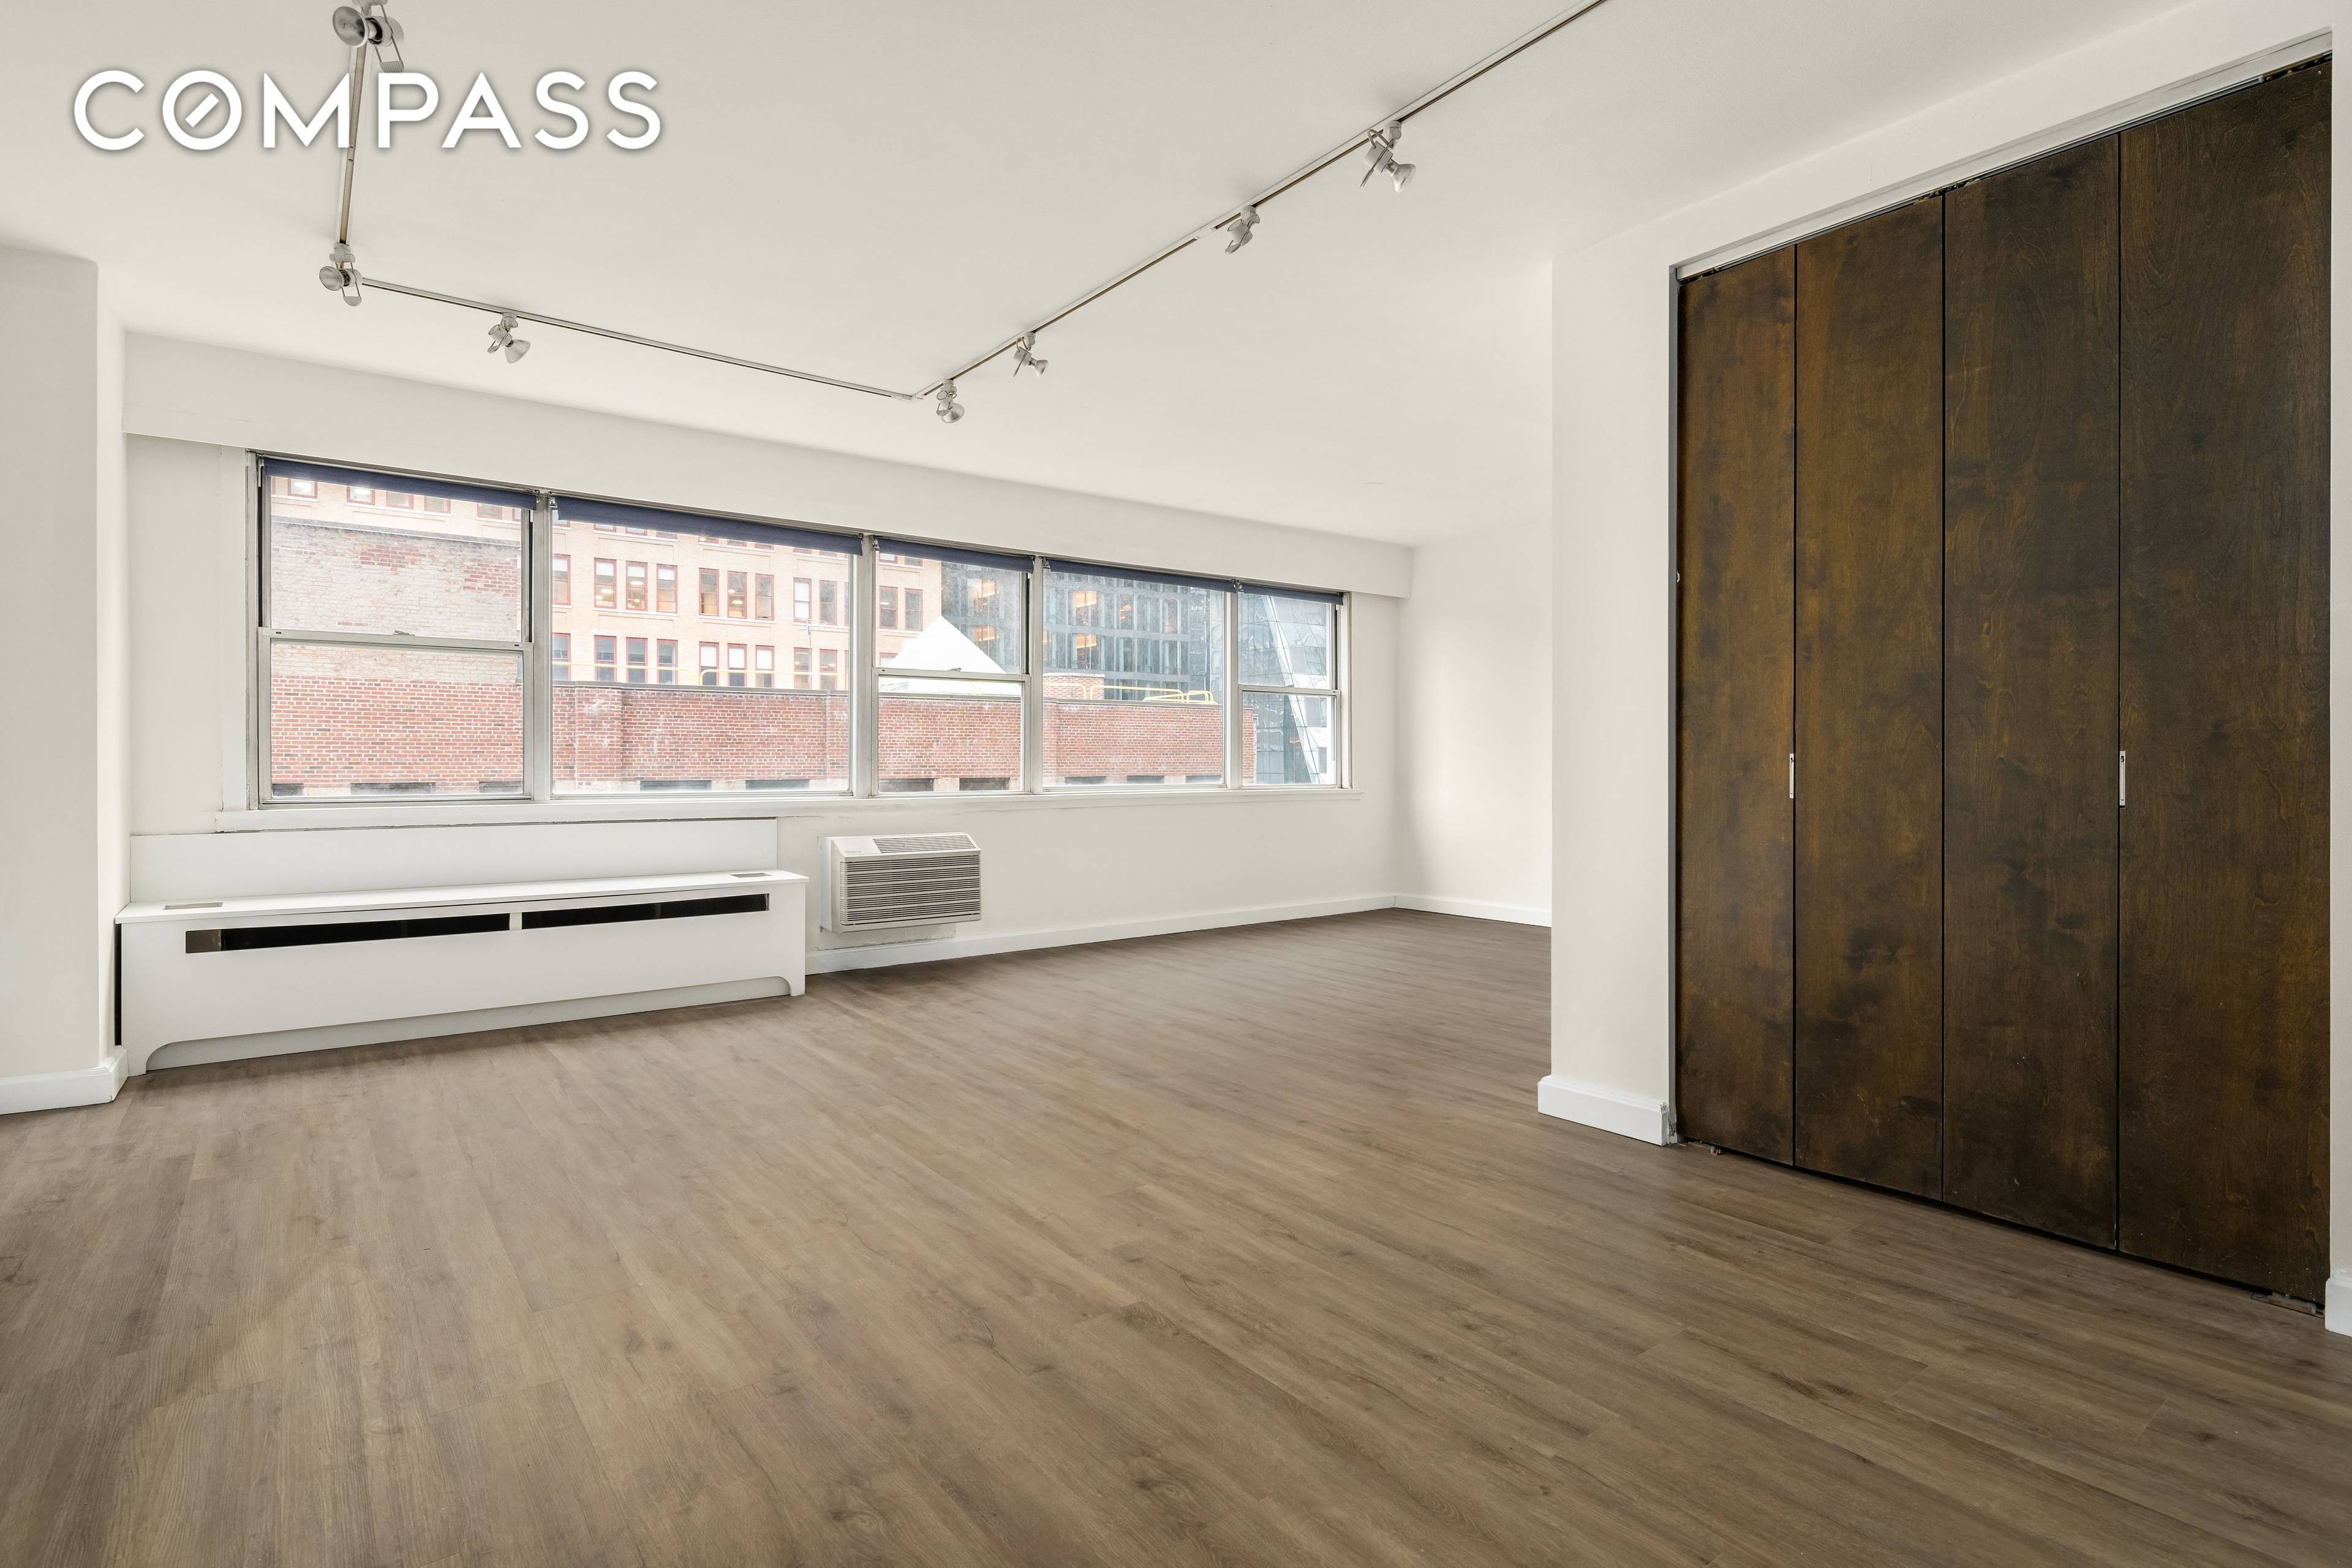 Located on West 34th Street in Hudson Yards, this massive alcove studio is on a high floor in Convention Overlook, a full service cooperative.